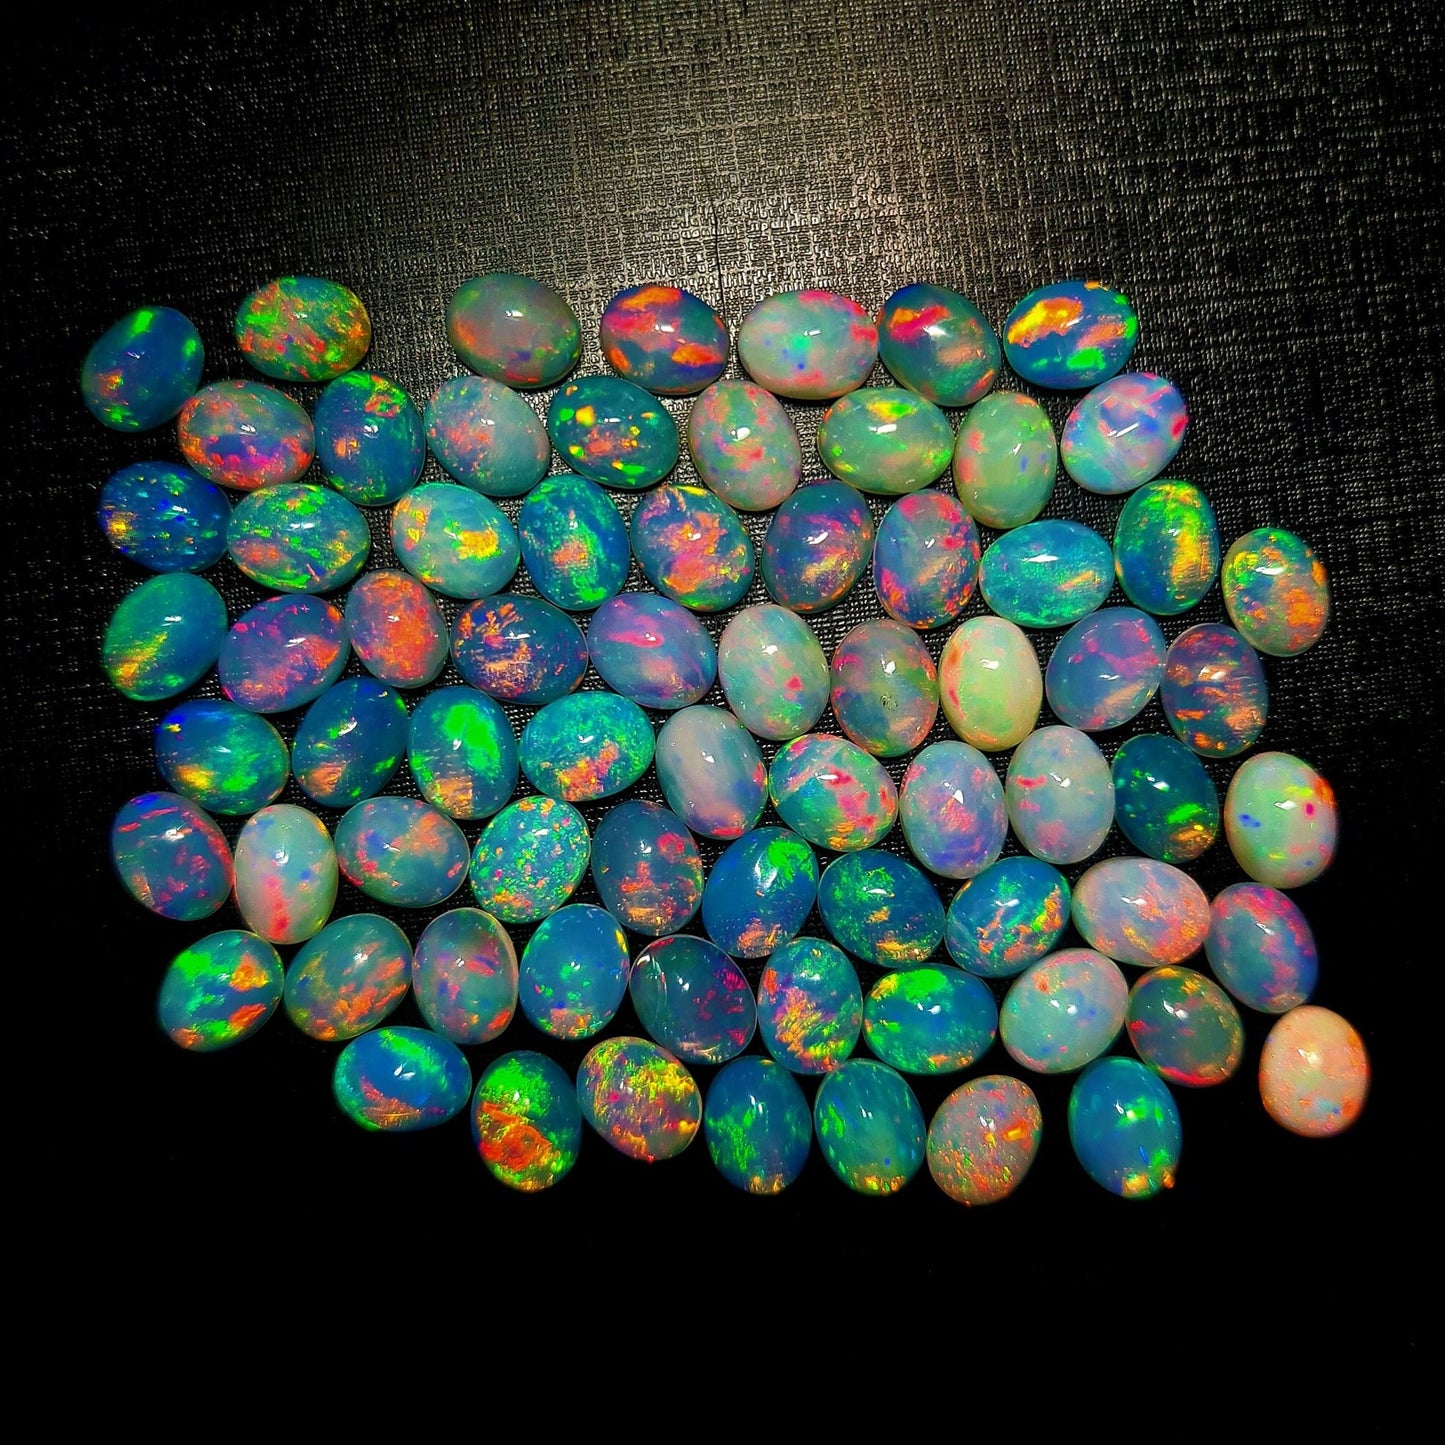 AAA Quality Natural Ethiopian Opal 7x9 mm Oval Gemstone Cabochon, Calibrated Opal Stone, Multi Fire Opal Loose Stone For Jewelry Making.